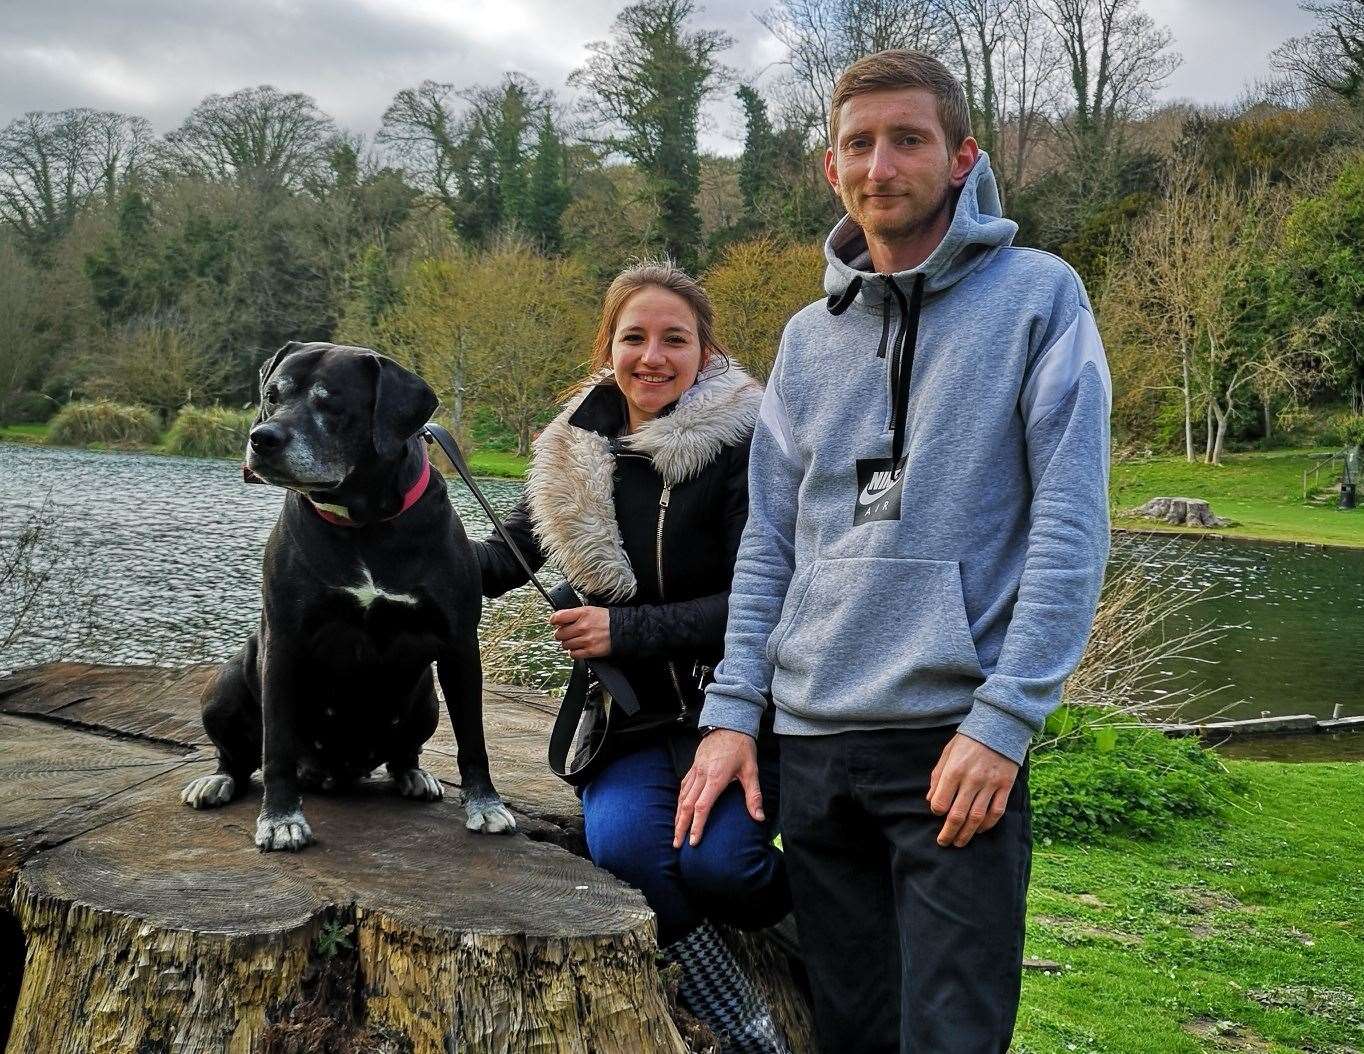 Dayle with partner Amber Donegan and their dog Bobo